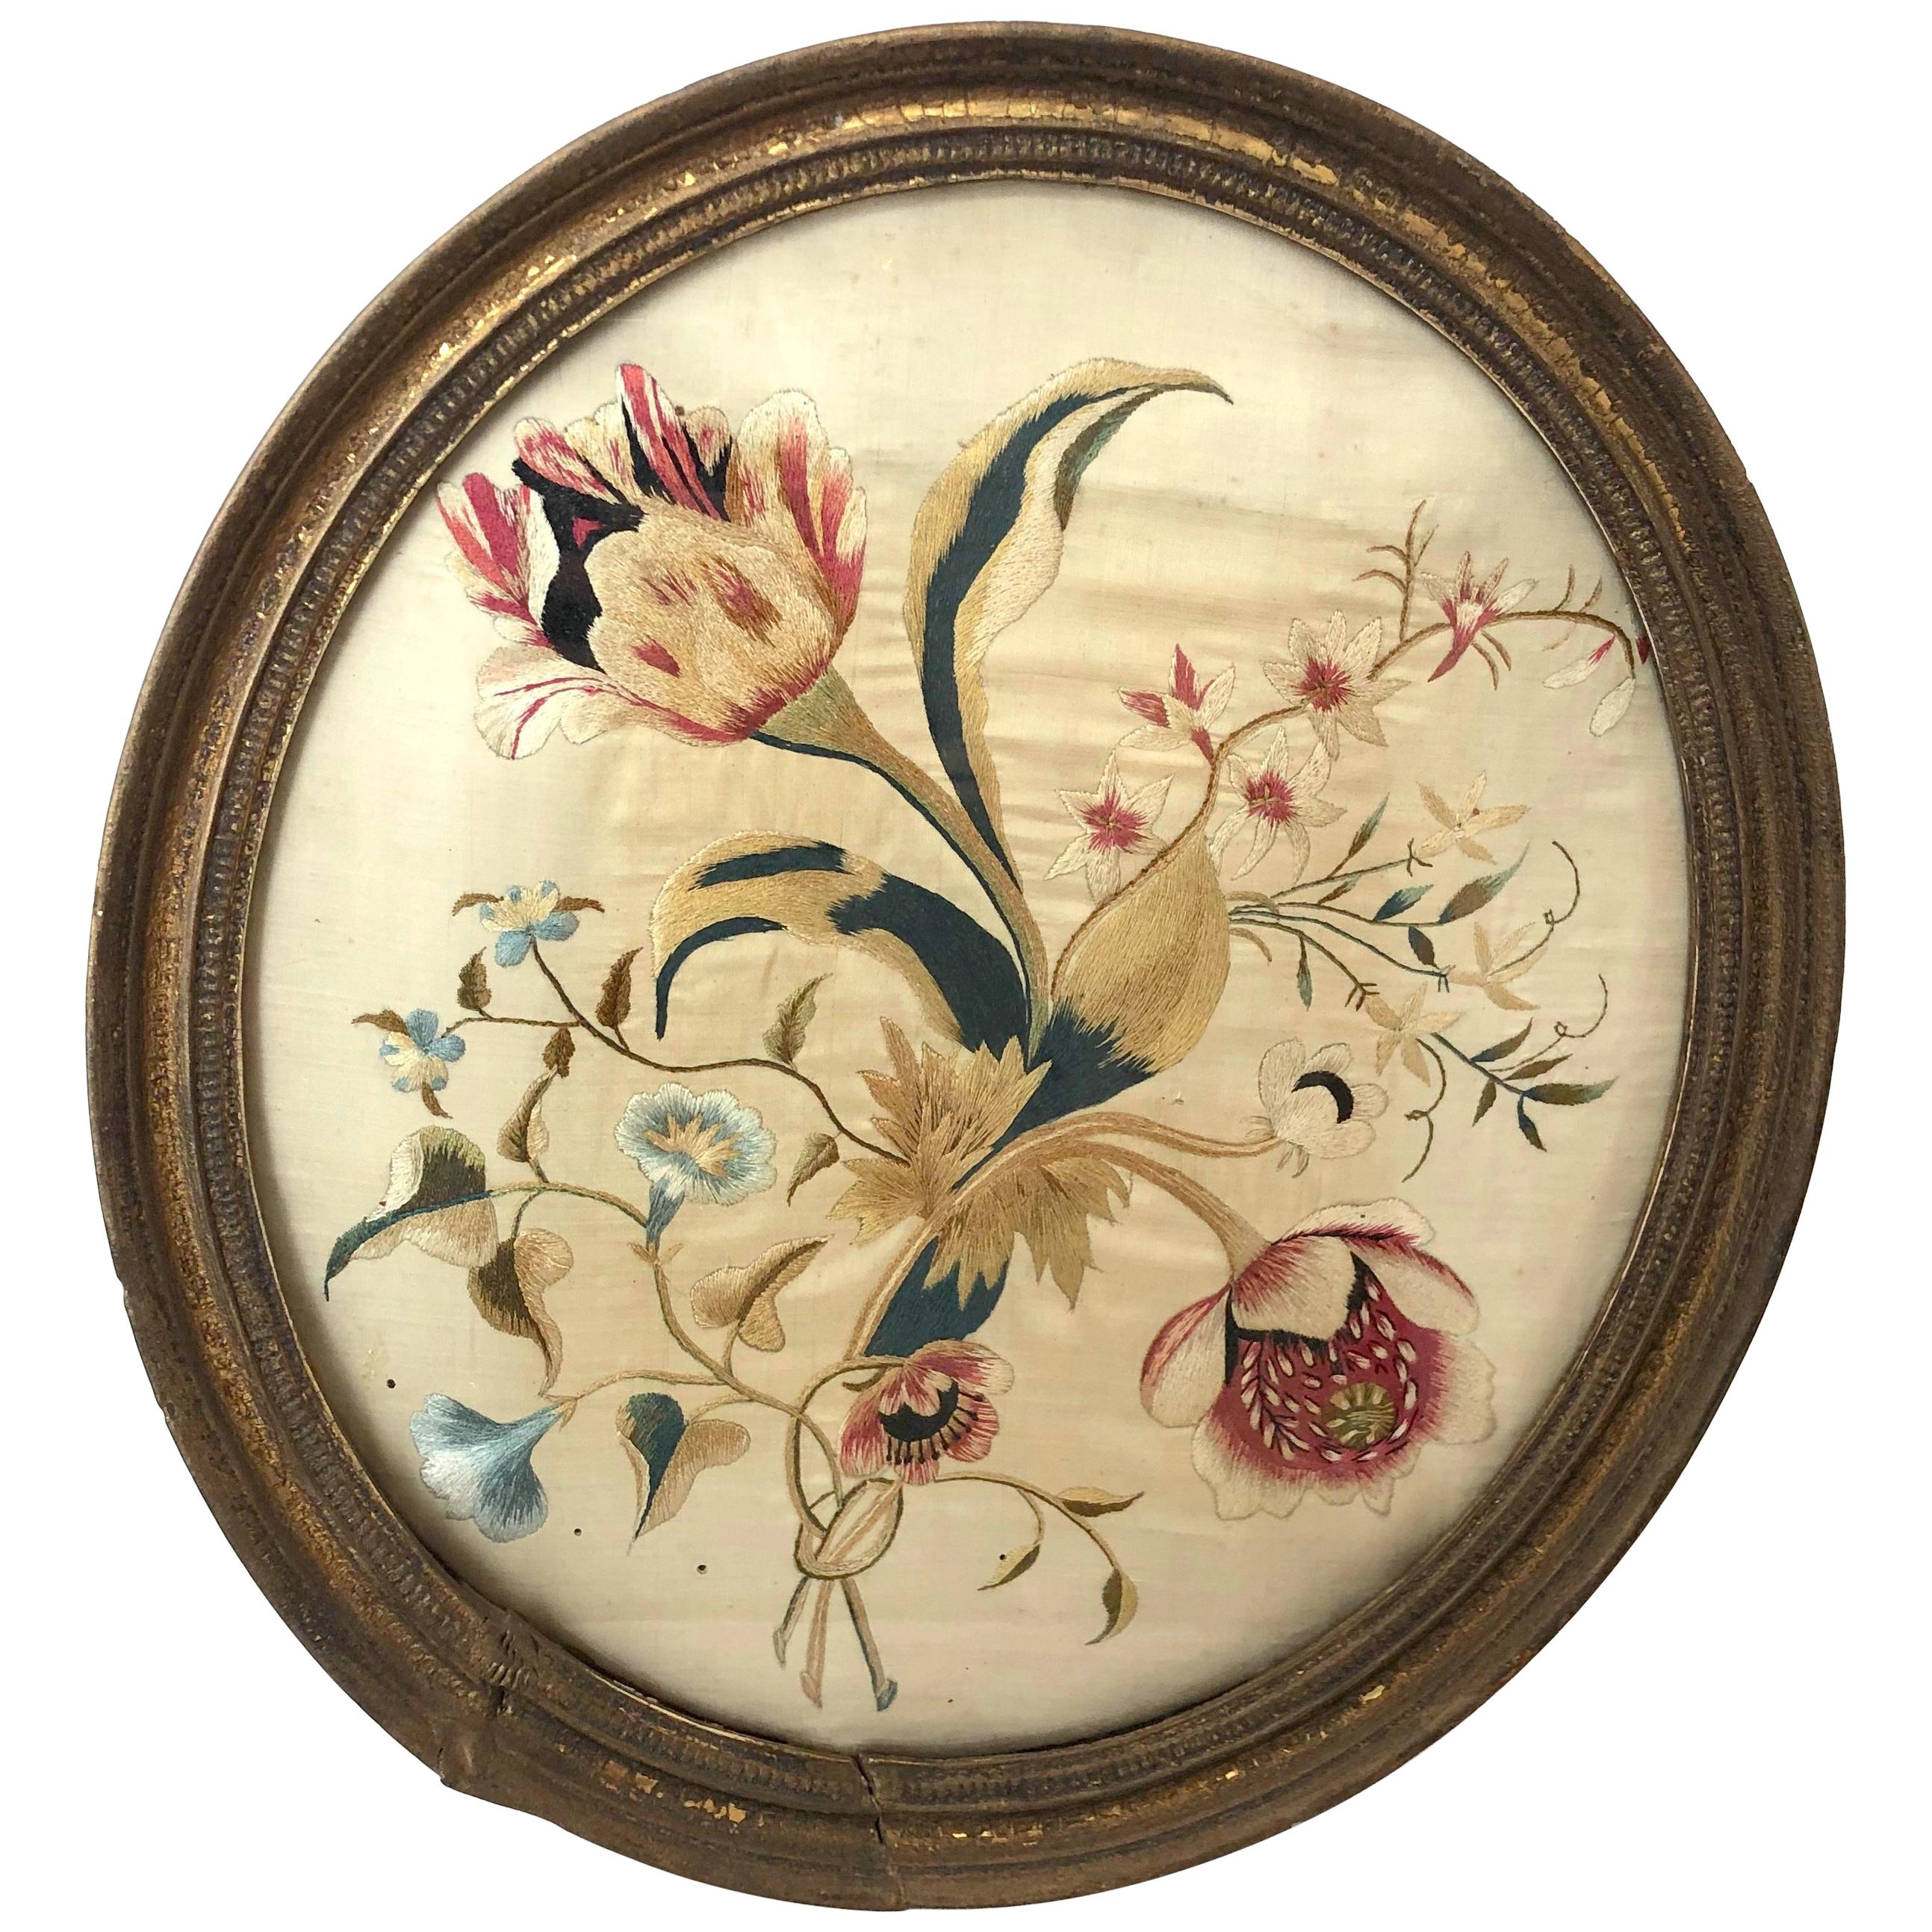 First Quarter of the 19th Century Oval Floral Embroidery For Sale